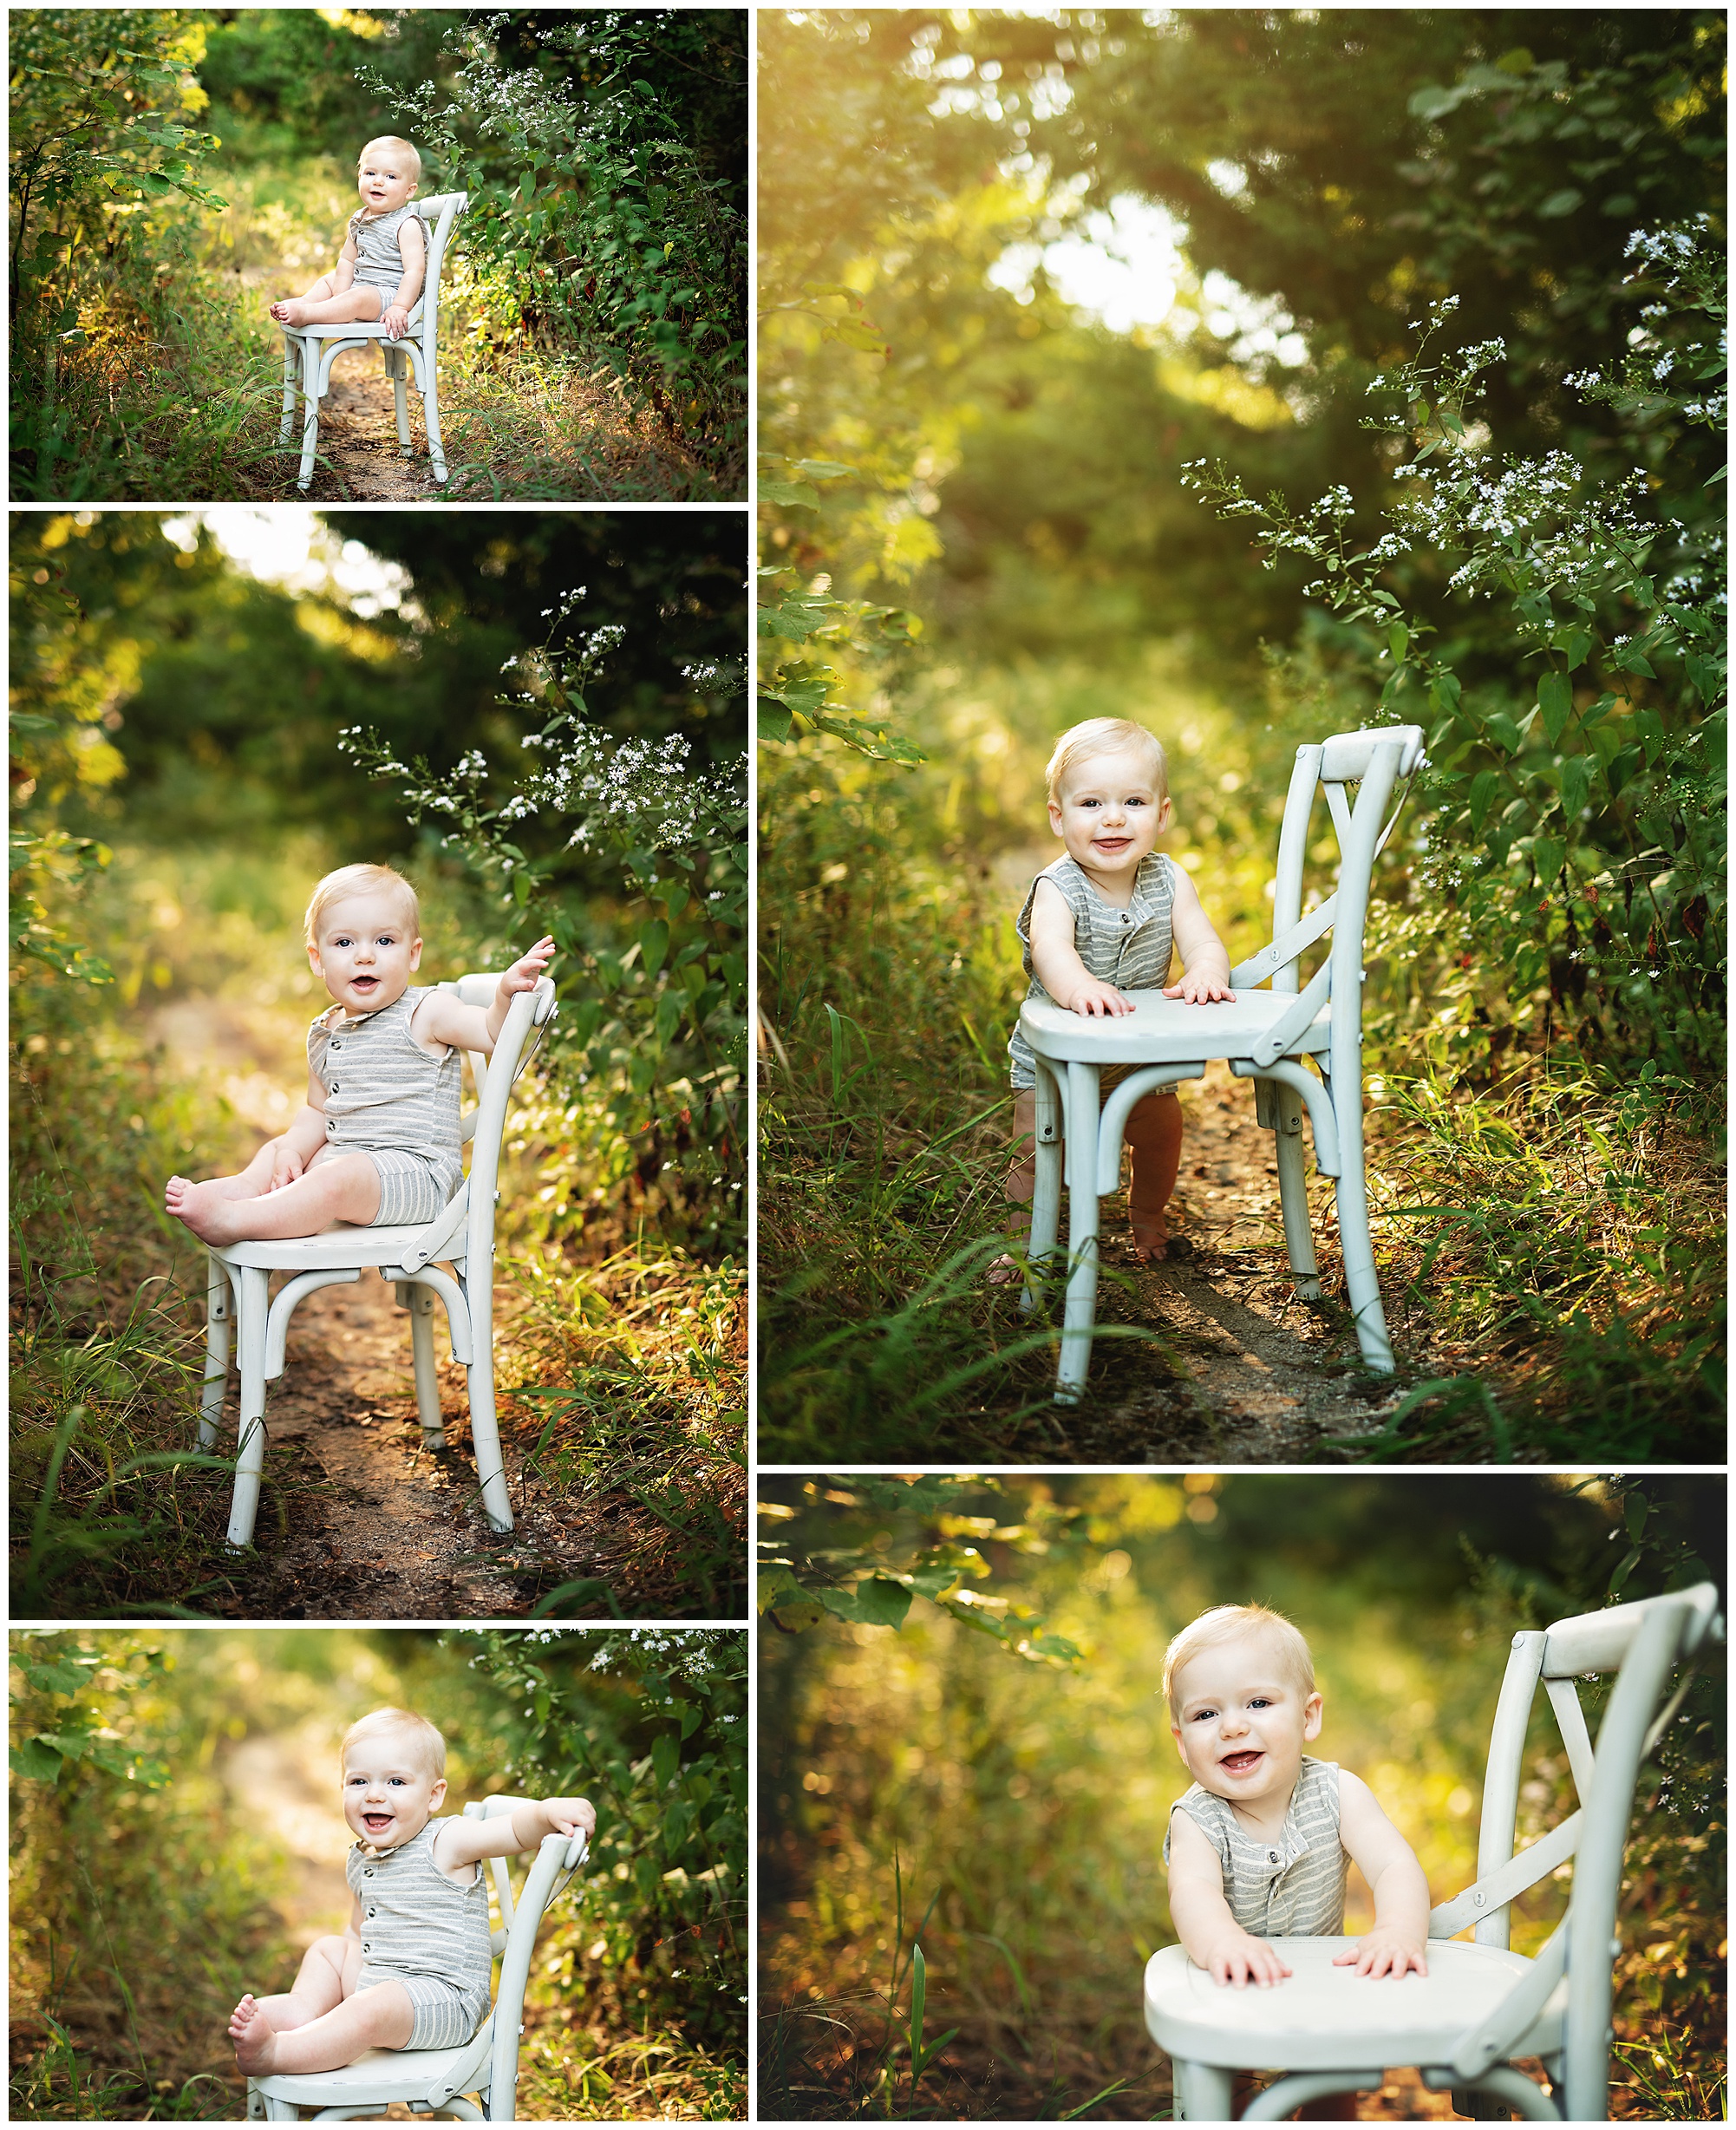 9 month old boy using a white chair to stand up with a gorgeous sunset behind him